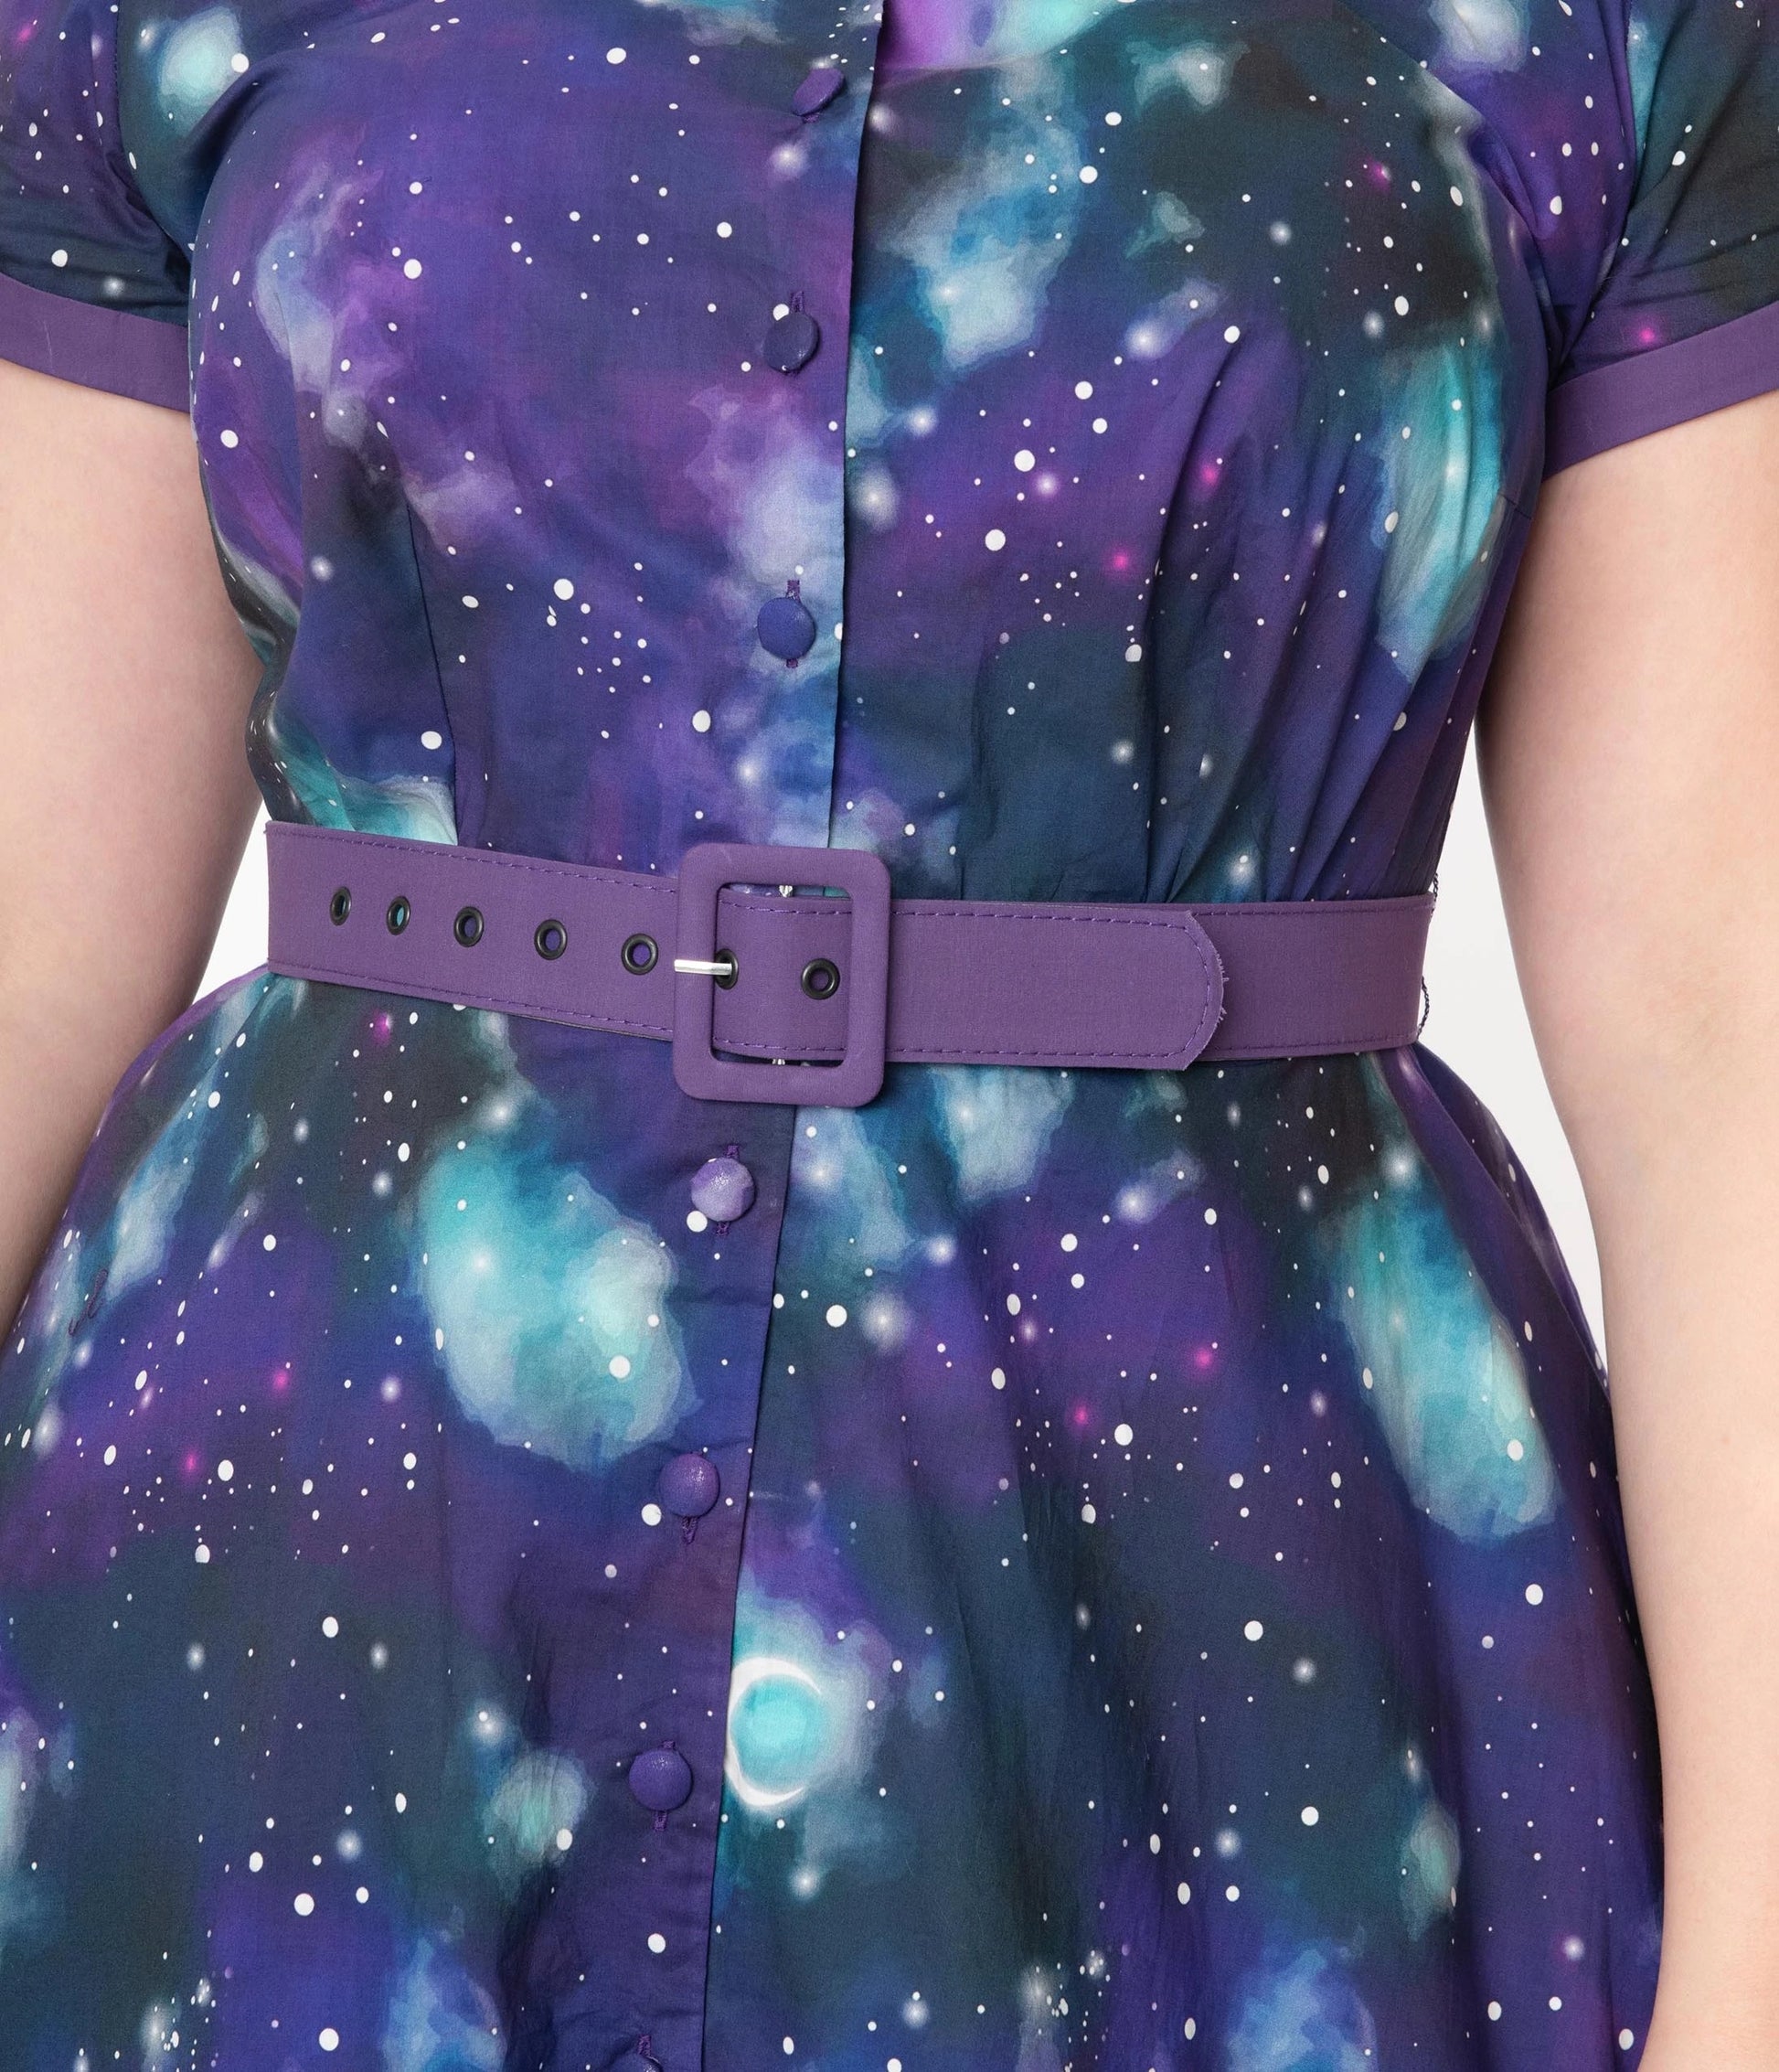 Close up of purple galaxy print dress with white stars and blue nebular patterns. The model is wearing a purple belt and the buttons down the front of the dress are purple fabric